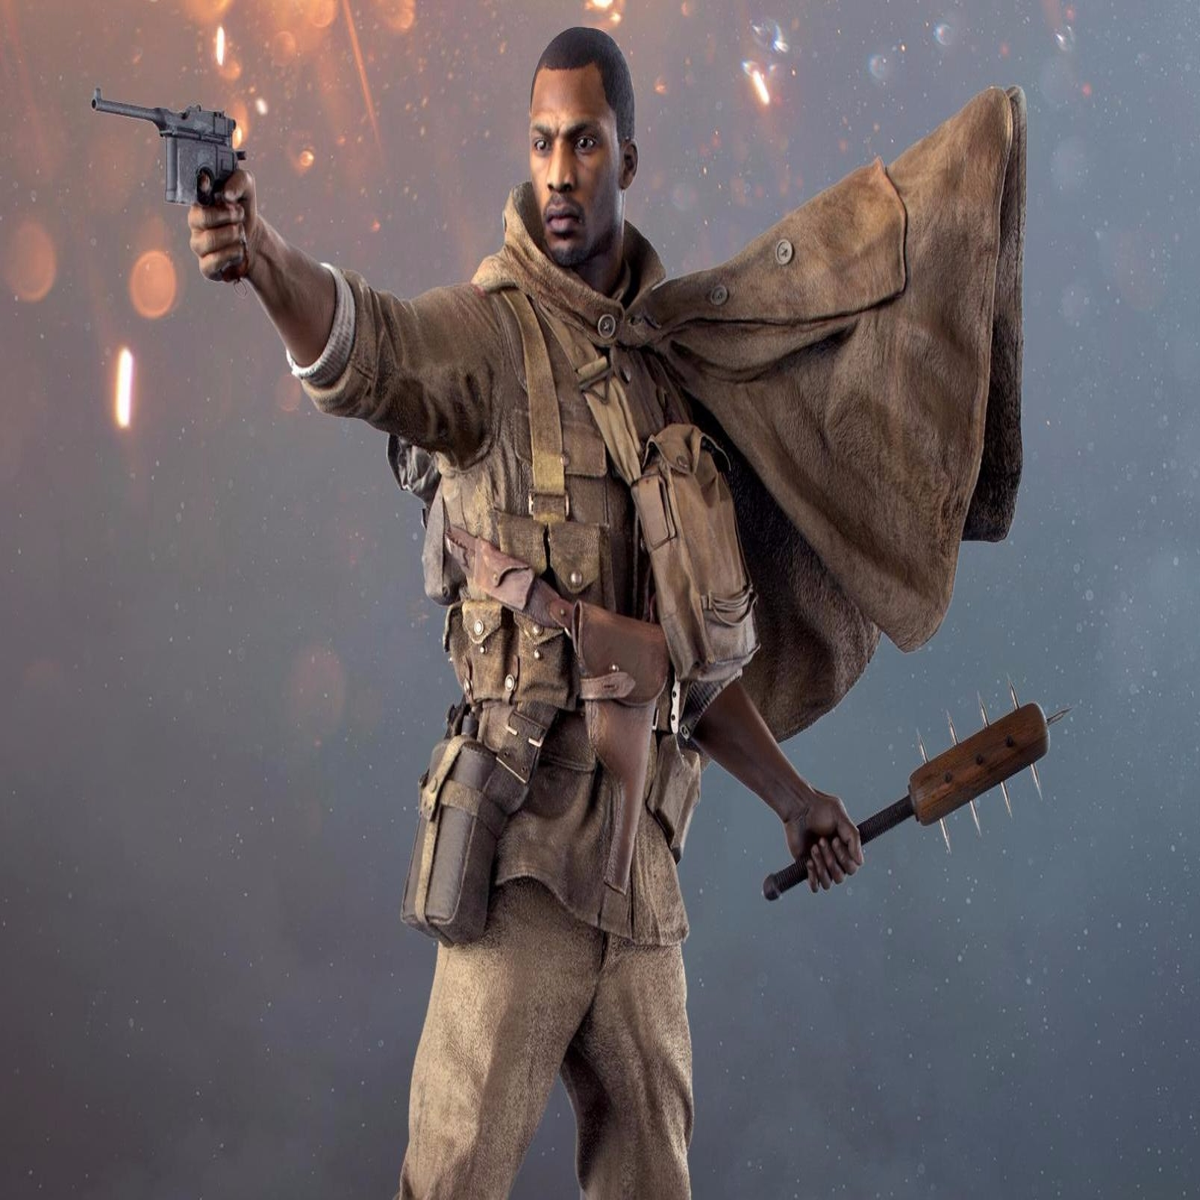 Battlefield 1 is free on PC through Prime Gaming